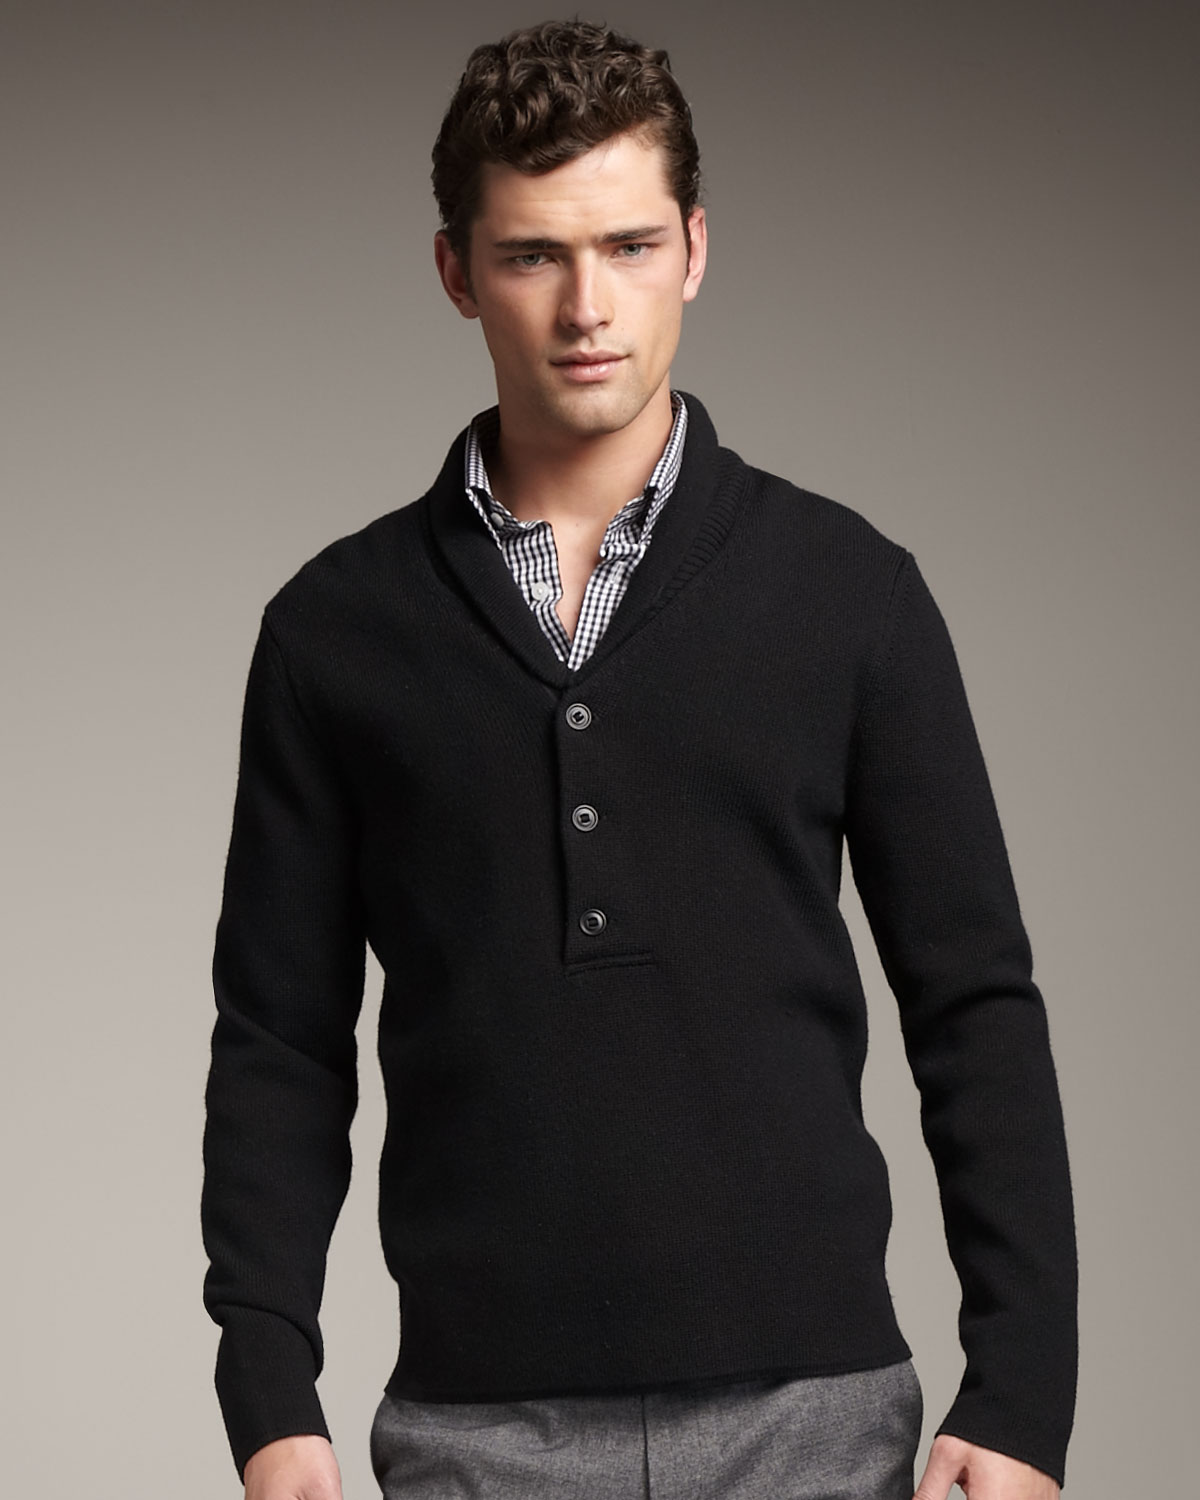 Lyst - Theory Shawl-collar Sweater, Black in Black for Men